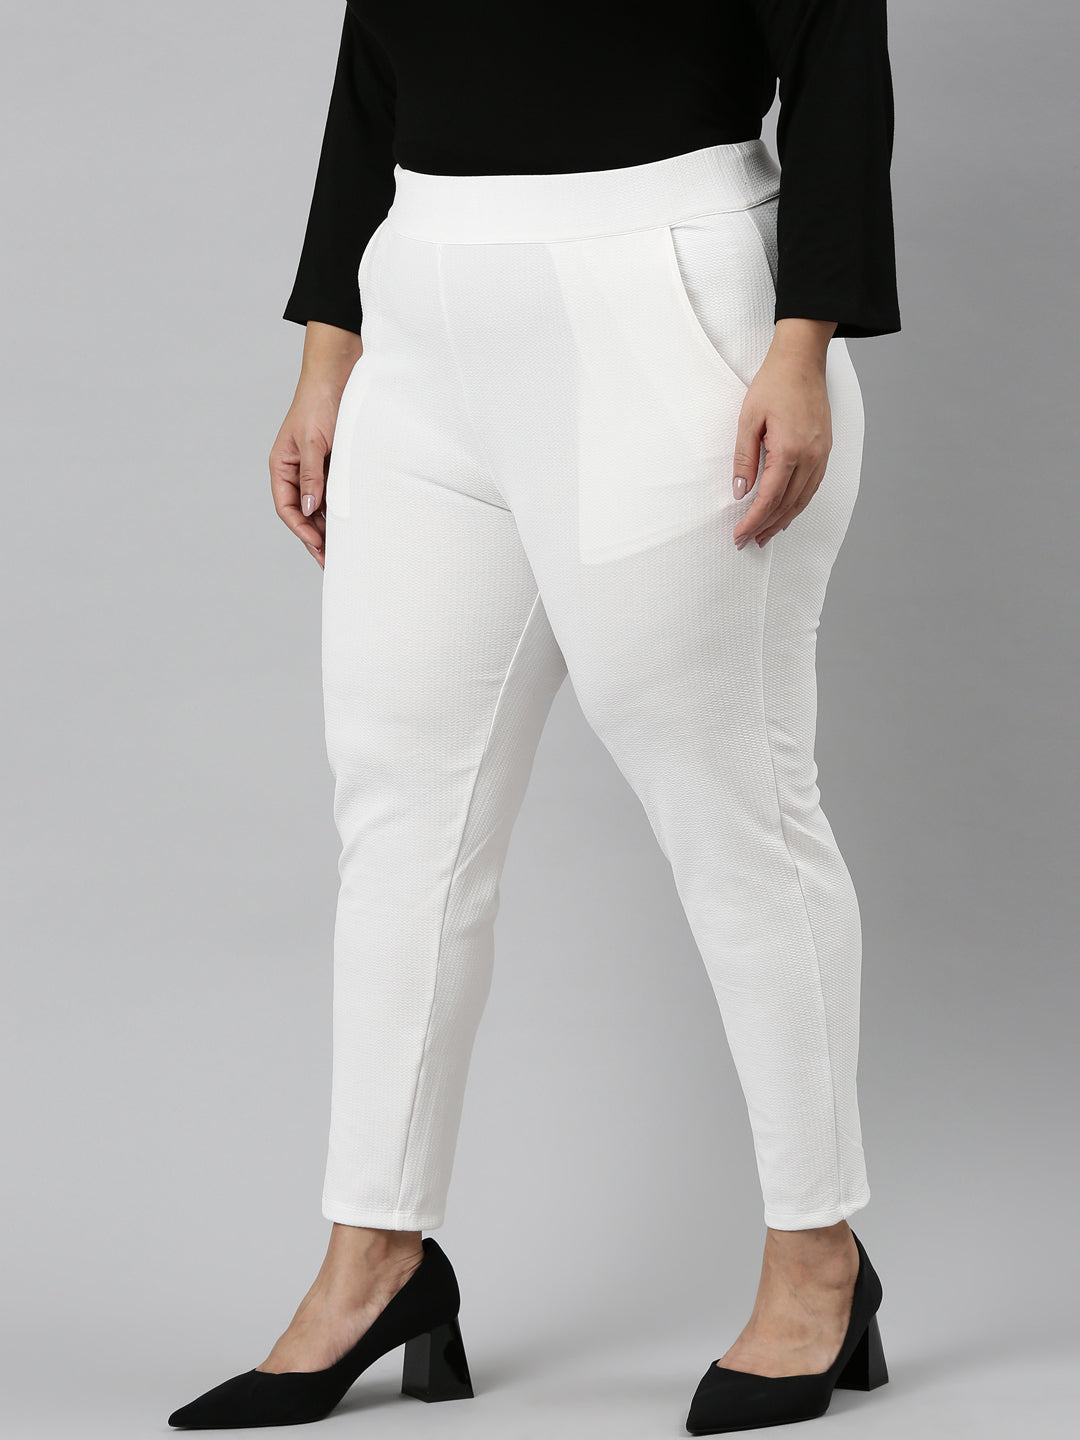 Plus Size white embossed stretch pants For Women L to 6XL  The Pink Moon